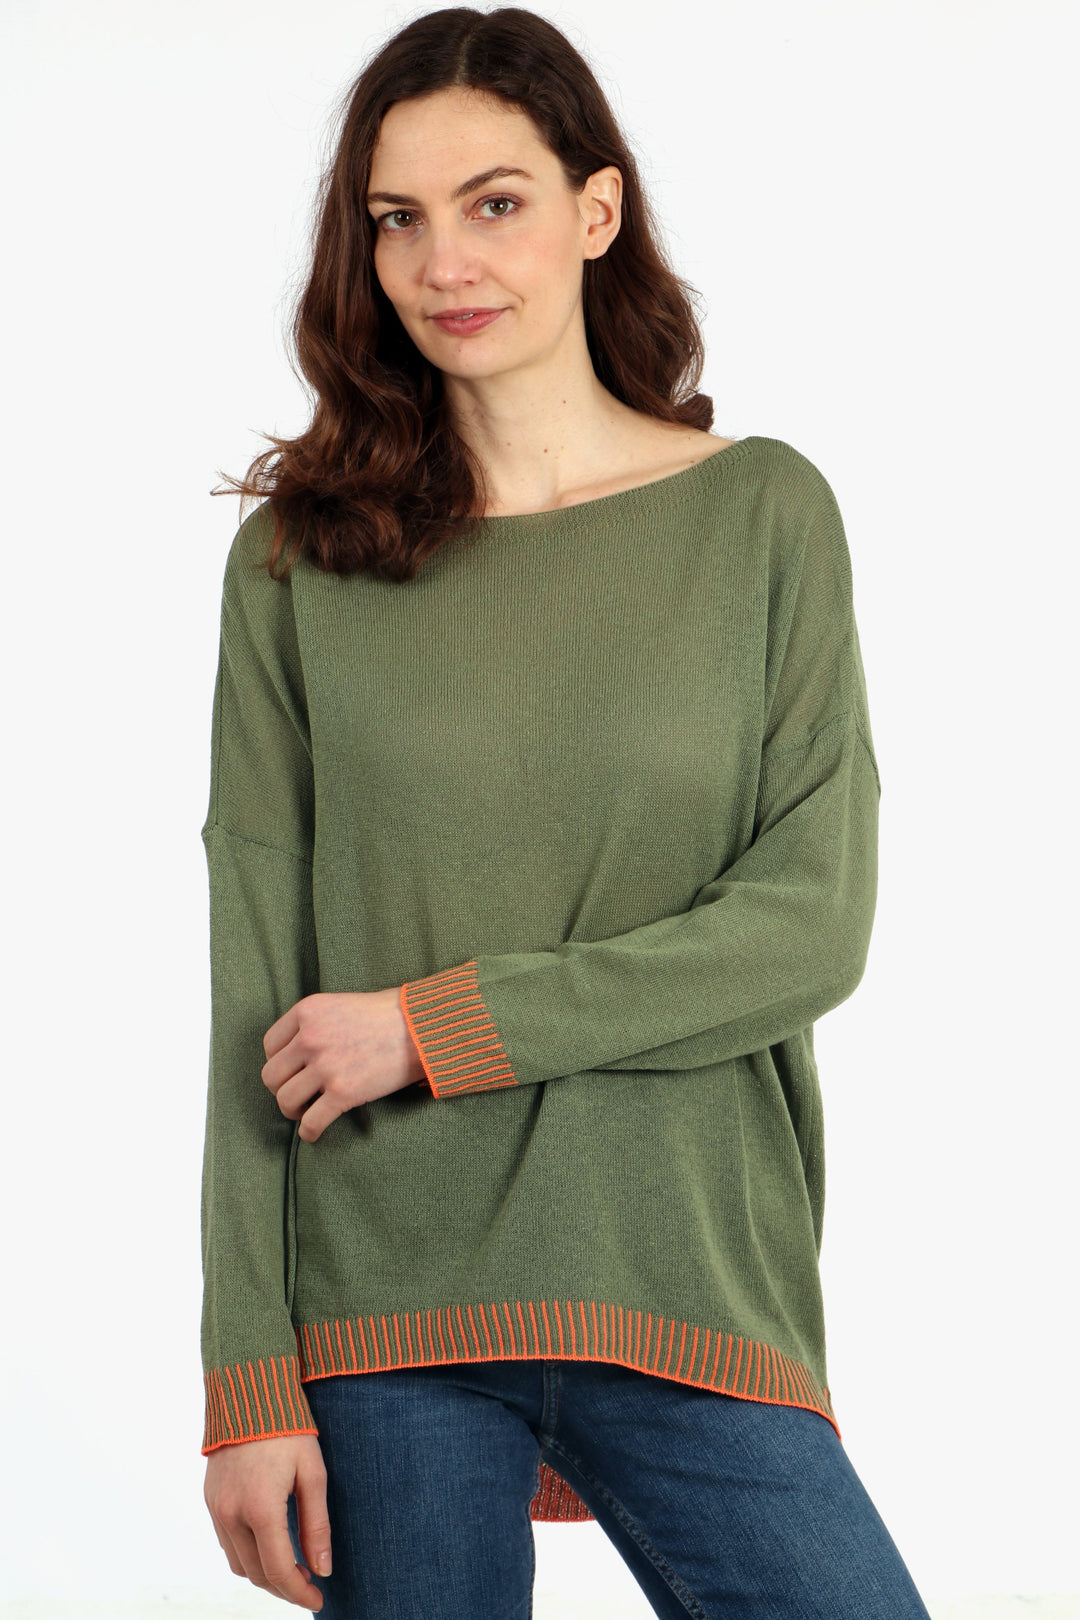 model wearing a long sleeve boat neck cotton jumper in khaki green with a contrasting orange stitched hem and cuff